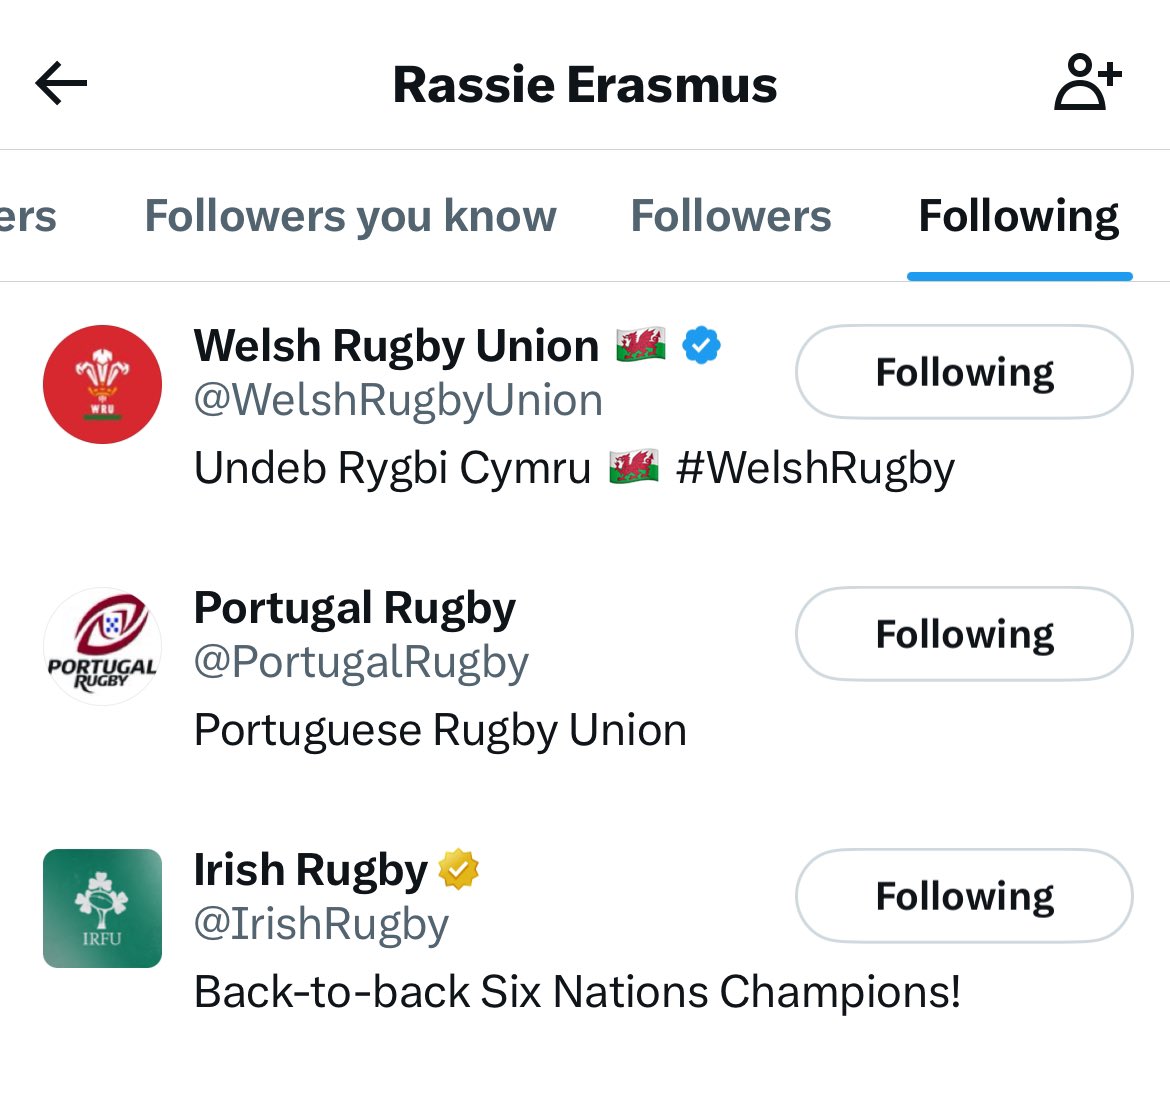 Updated list of accounts Rassie is following! 👀 #springboks